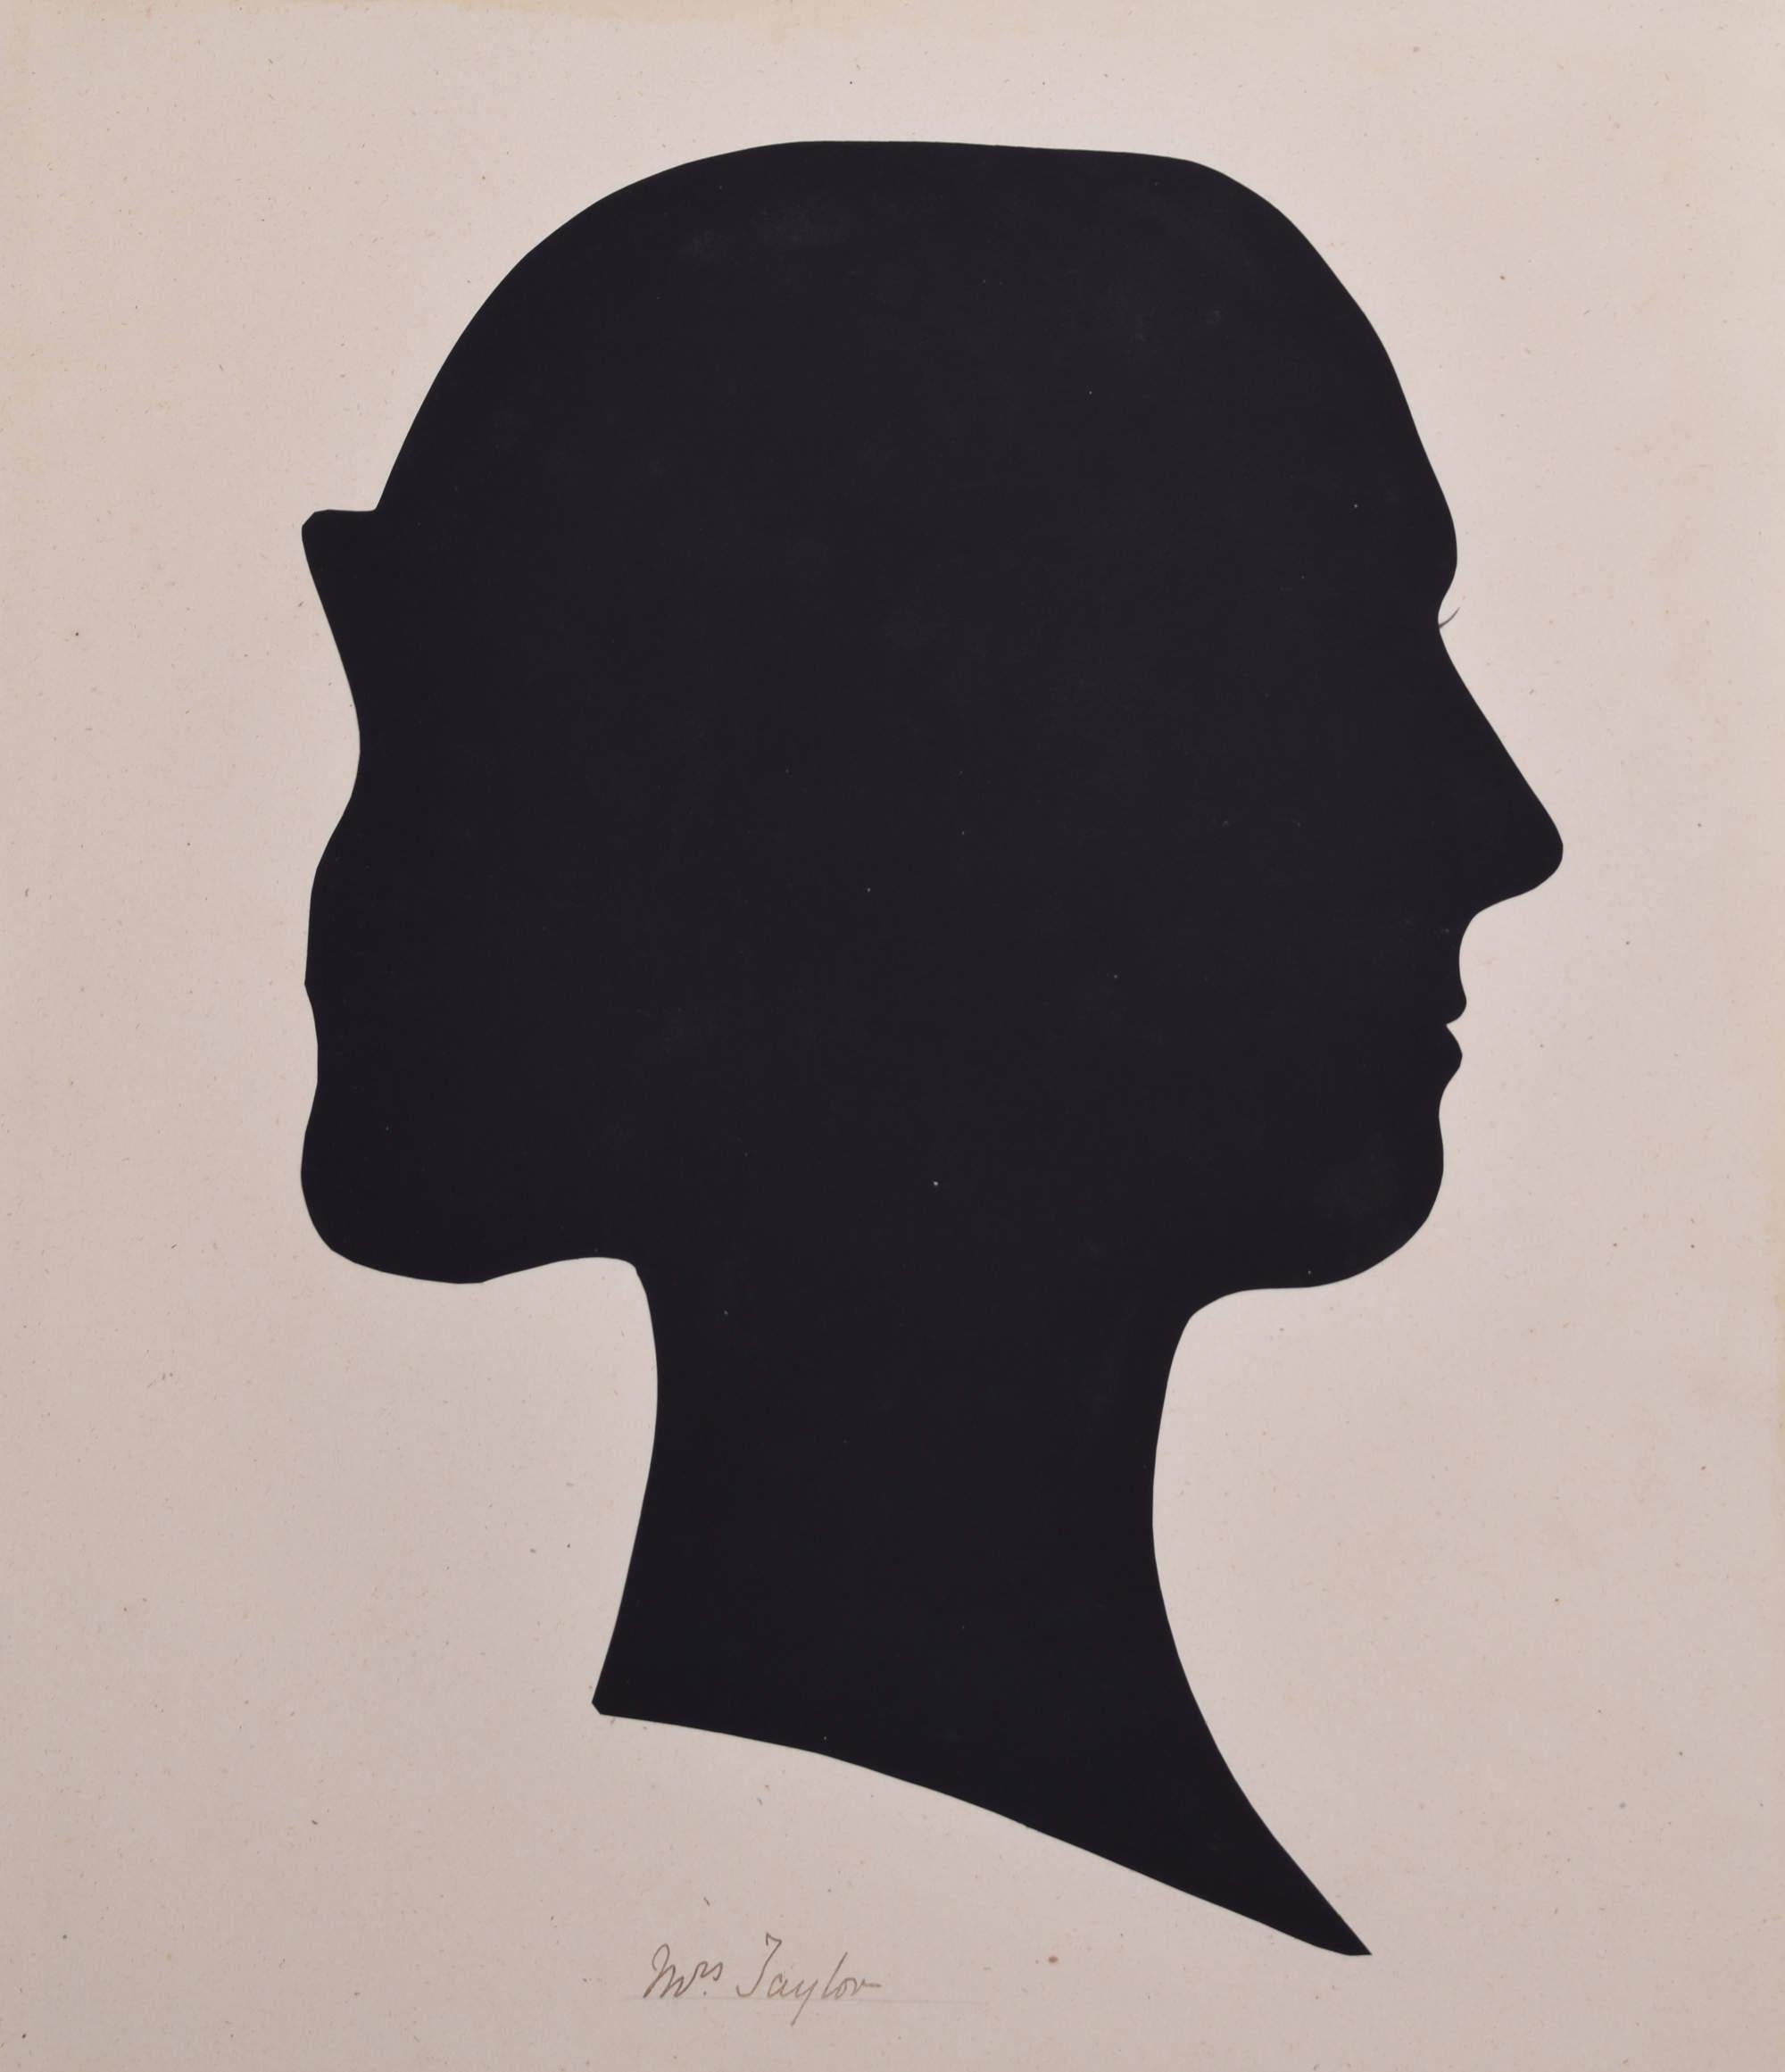 Nineteenth century silhouette of a lady: Mrs Taylor